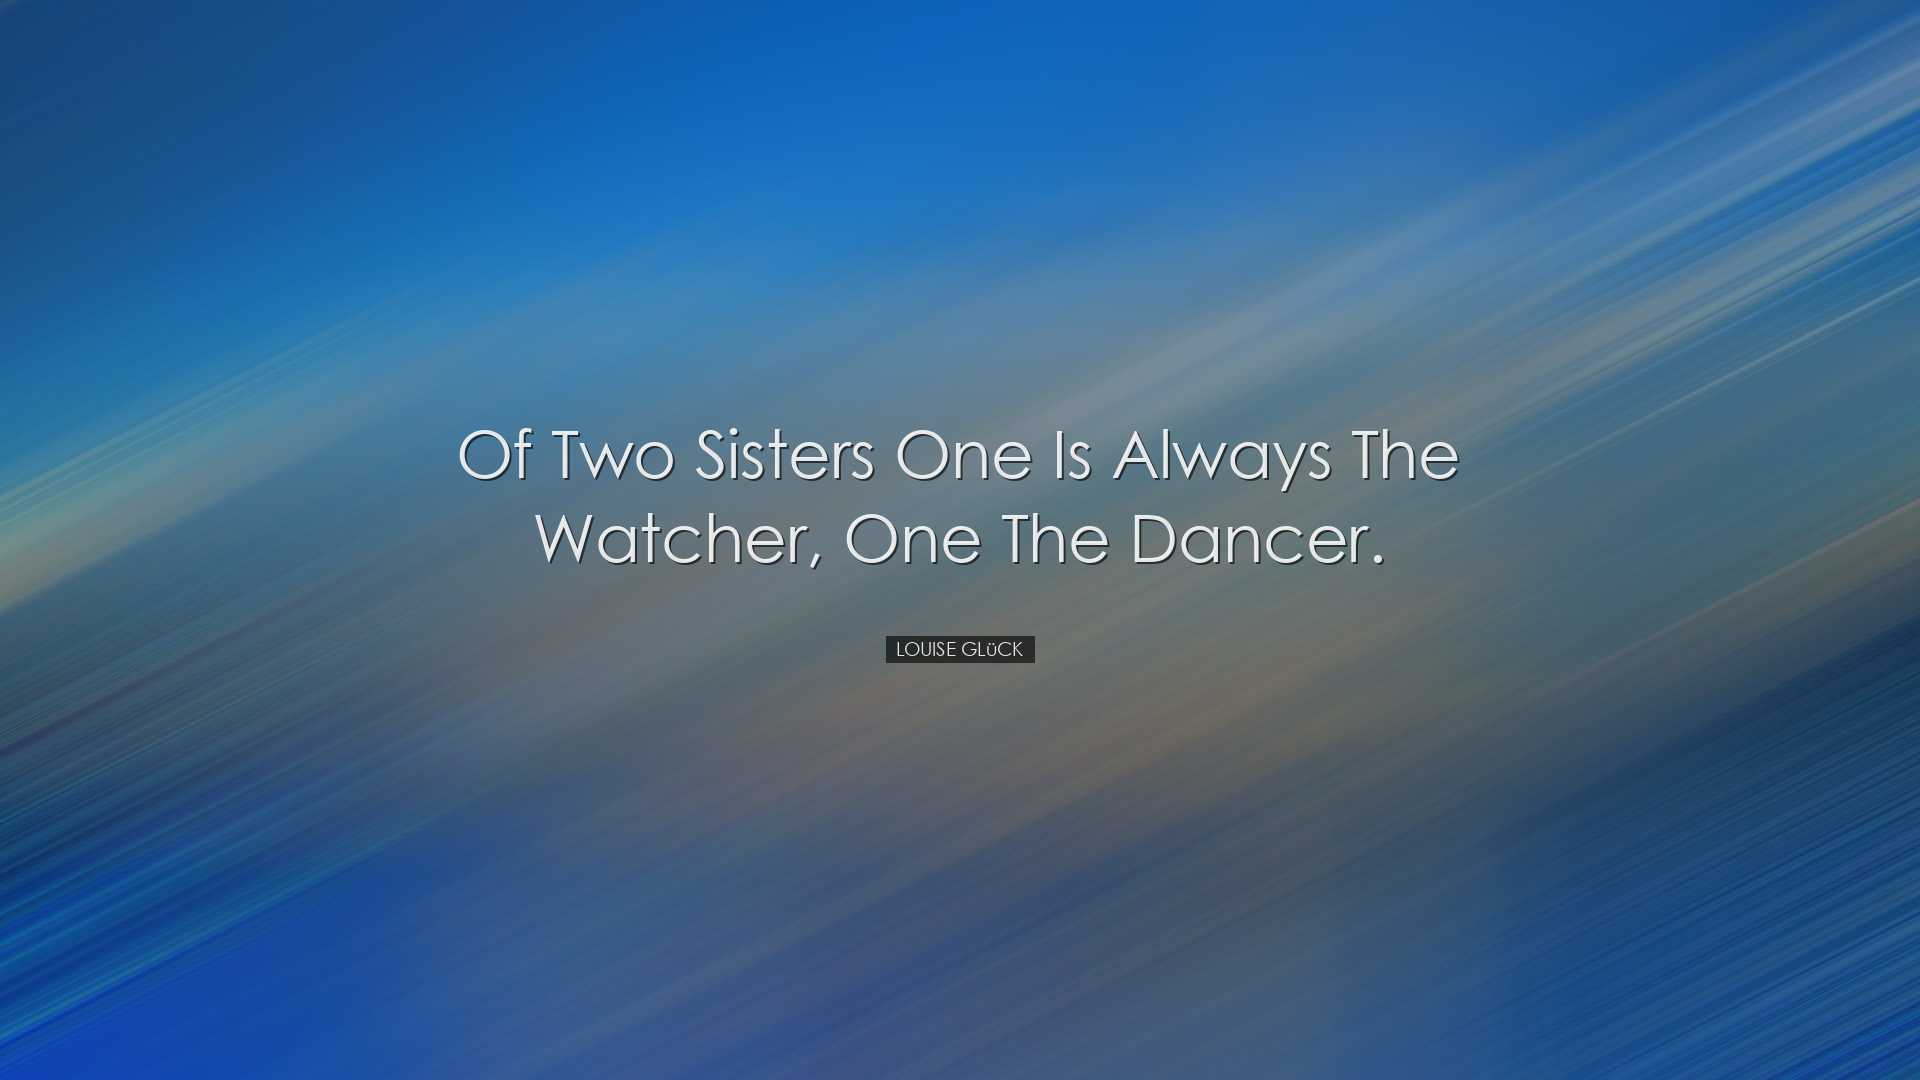 Of two sisters one is always the watcher, one the dancer. - Louise